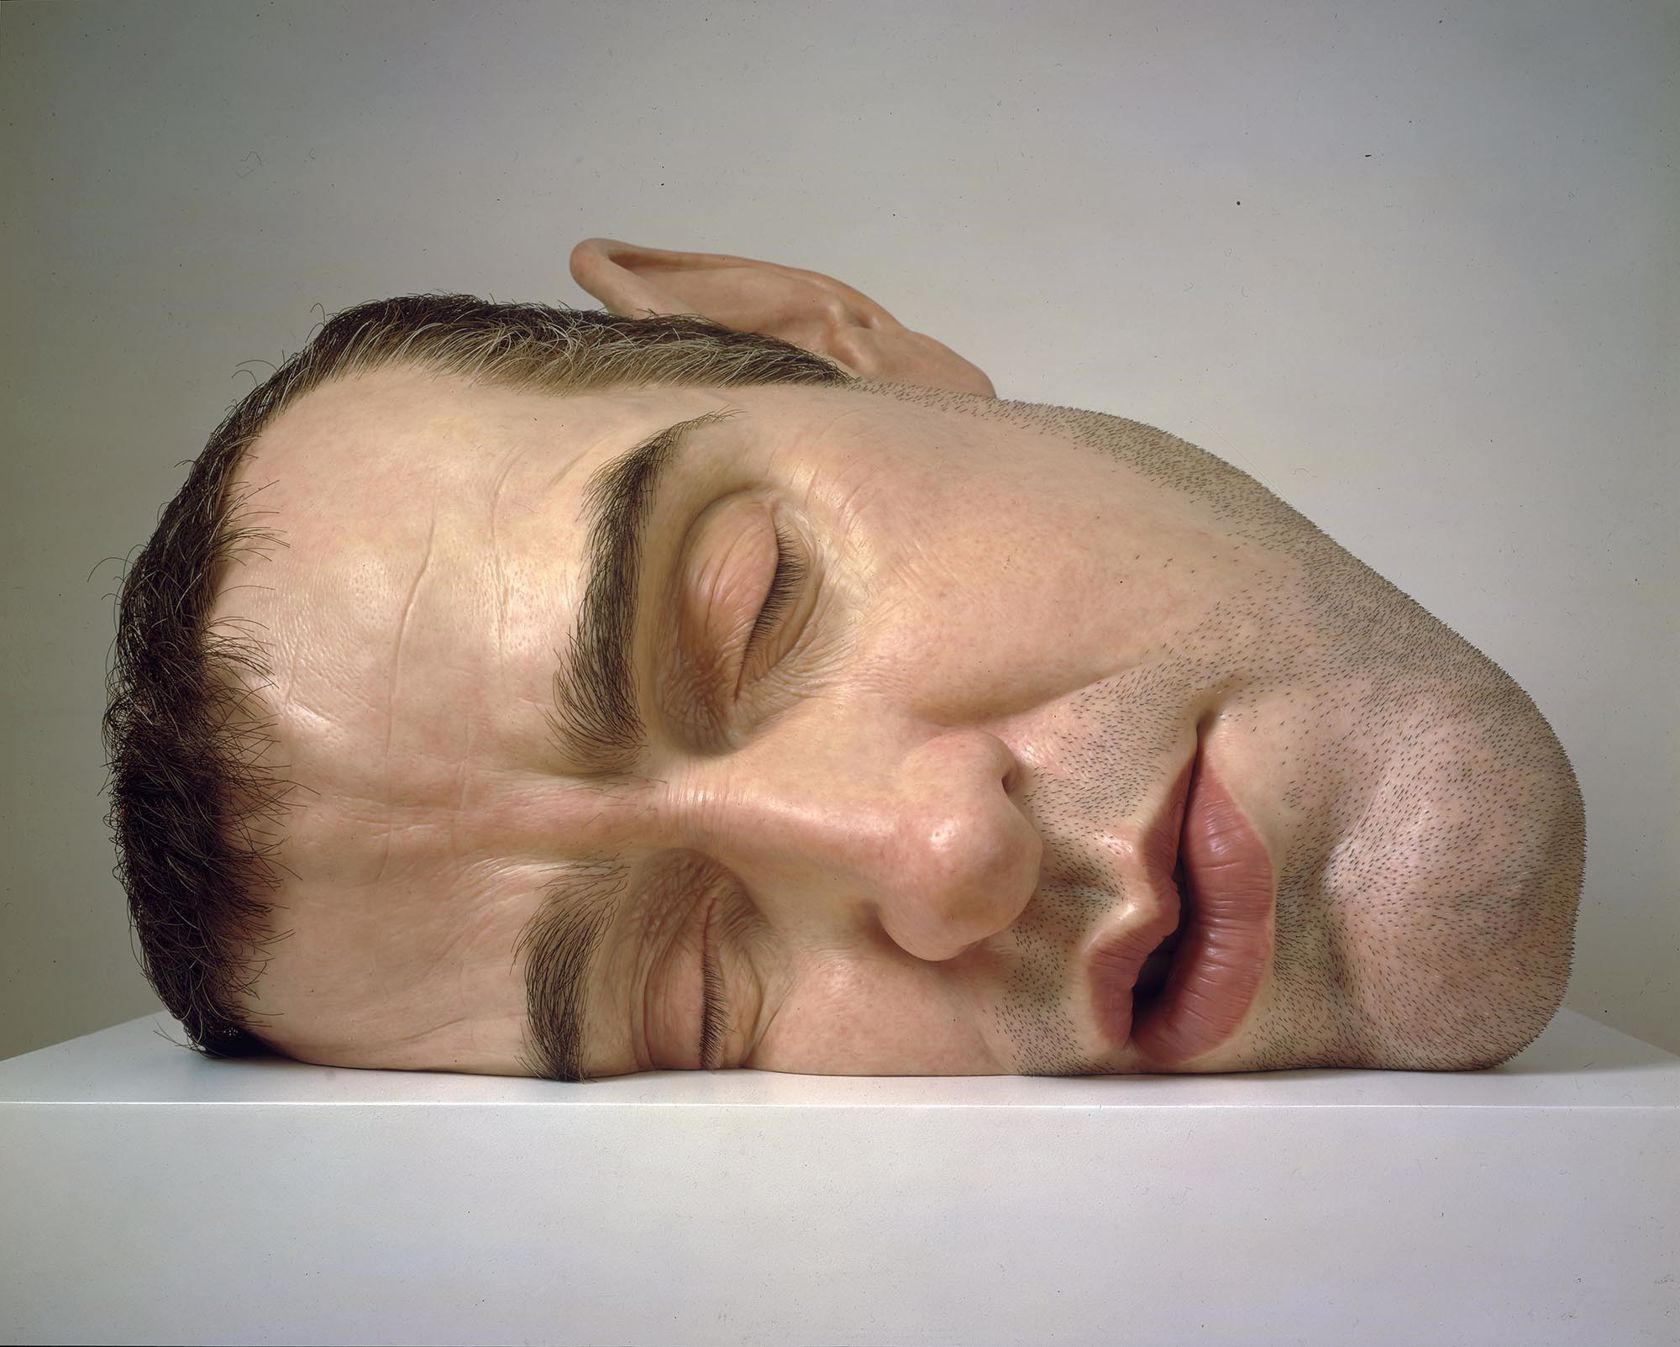 bord Stereotype forsætlig Introducing Ron Mueck | Inside the MFAH | The Museum of Fine Arts, Houston